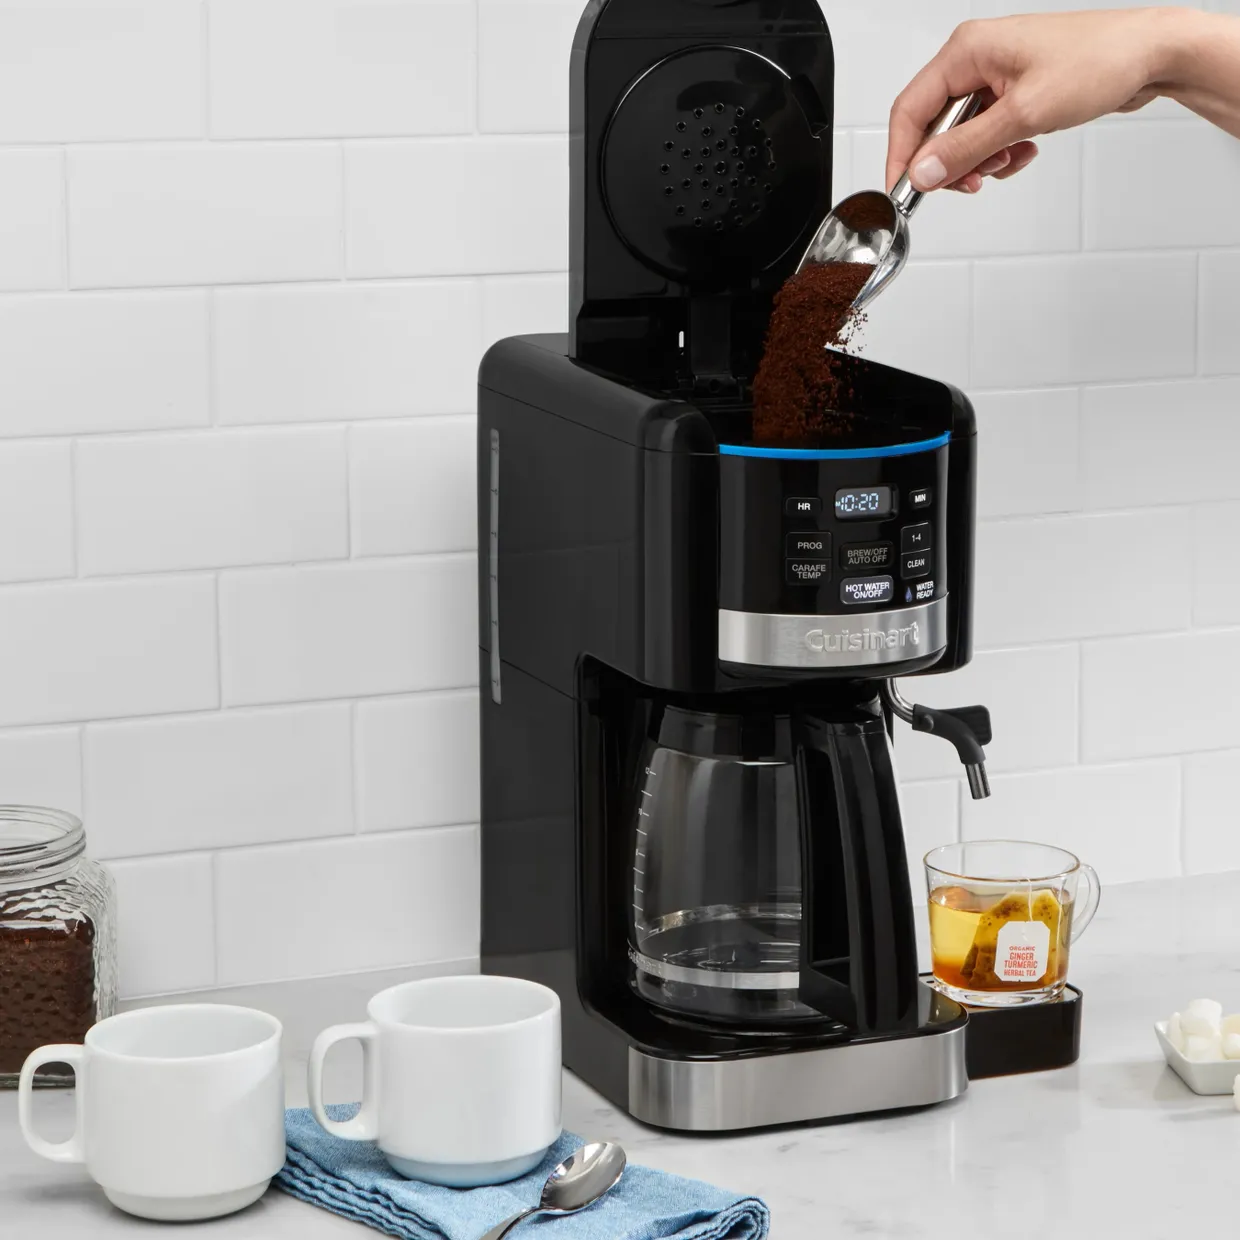 A Cuisinart coffee maker with a digital display, a hand pouring ground coffee, two white cups, and a glass jar of coffee grounds.